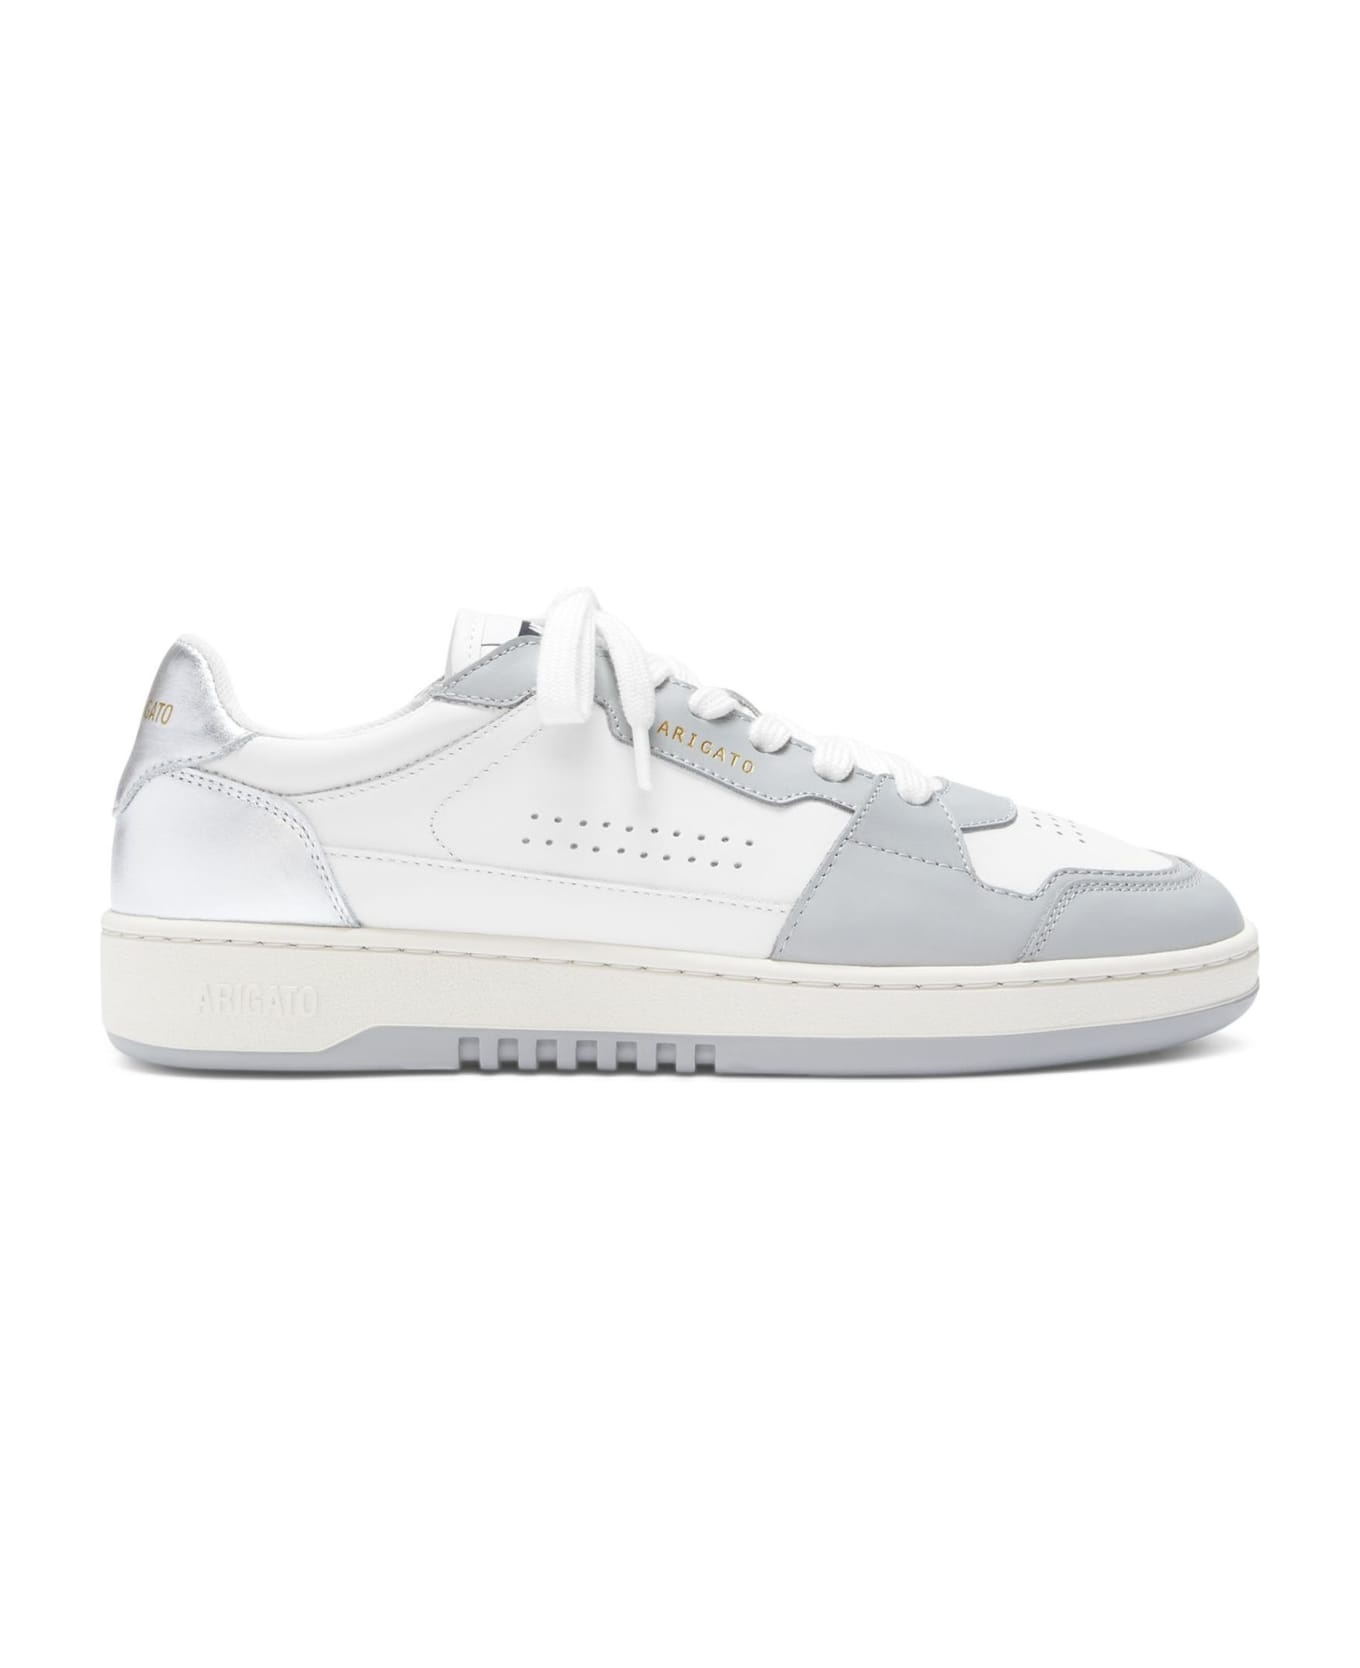 White And Grey Dice Lo Sneaker - 1